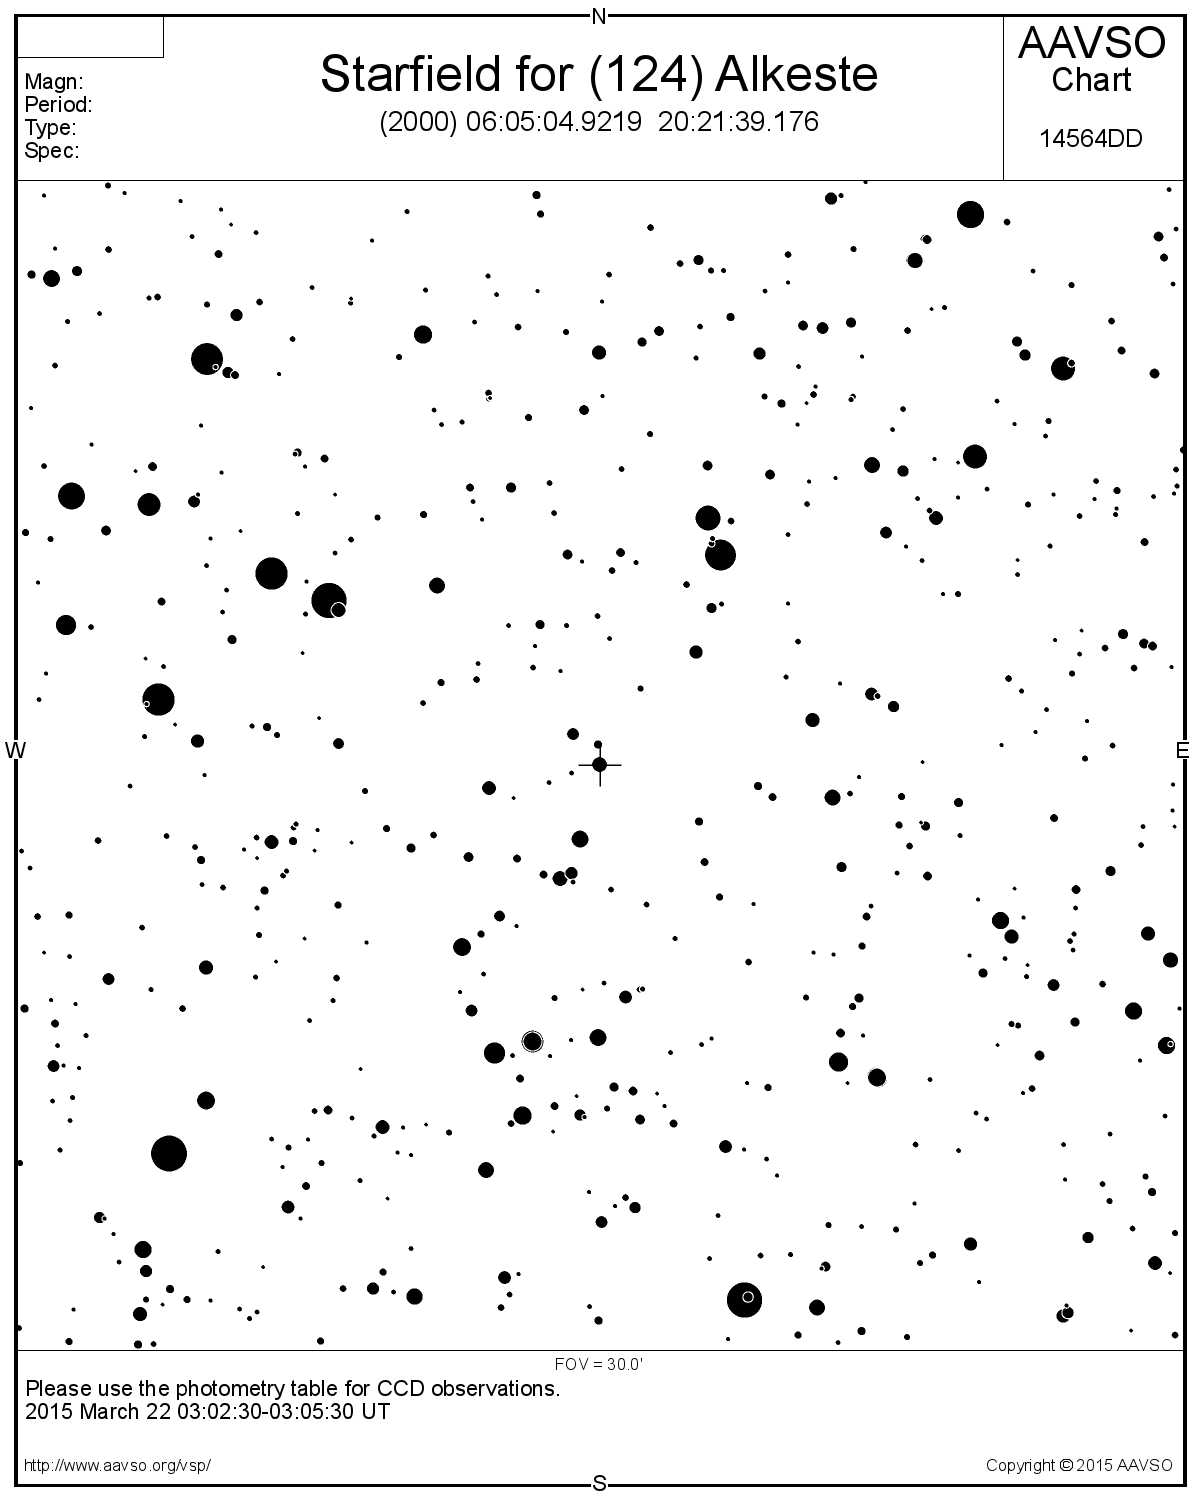 Starfield for (124) Alkeste showing field at 30 arcmins.  Creasted using AAVSO VSP.